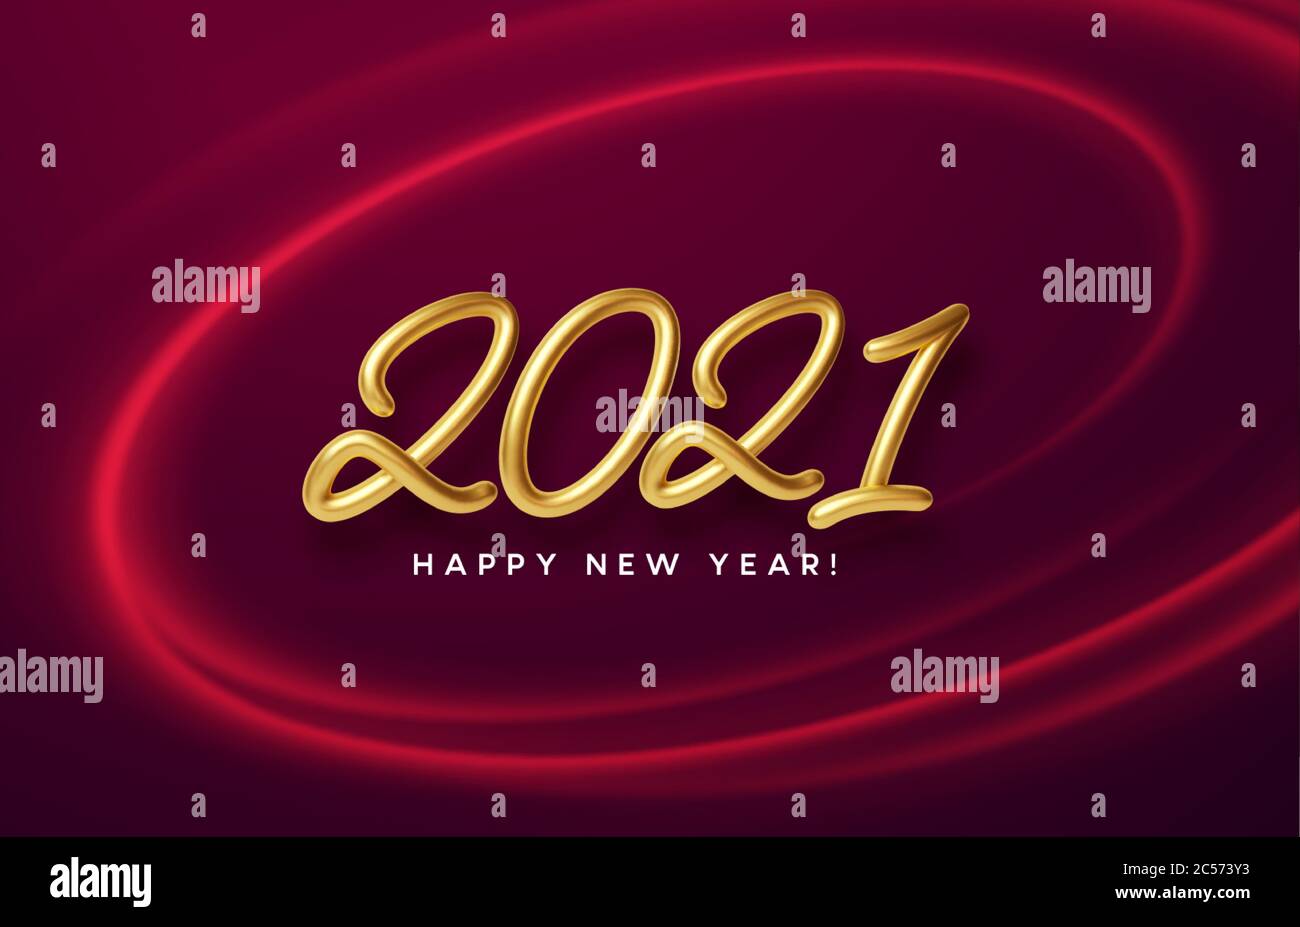 Realistic shiny 3D golden inscription 2021 happy new year on a background with red bright waves. Vector illustration Stock Vector